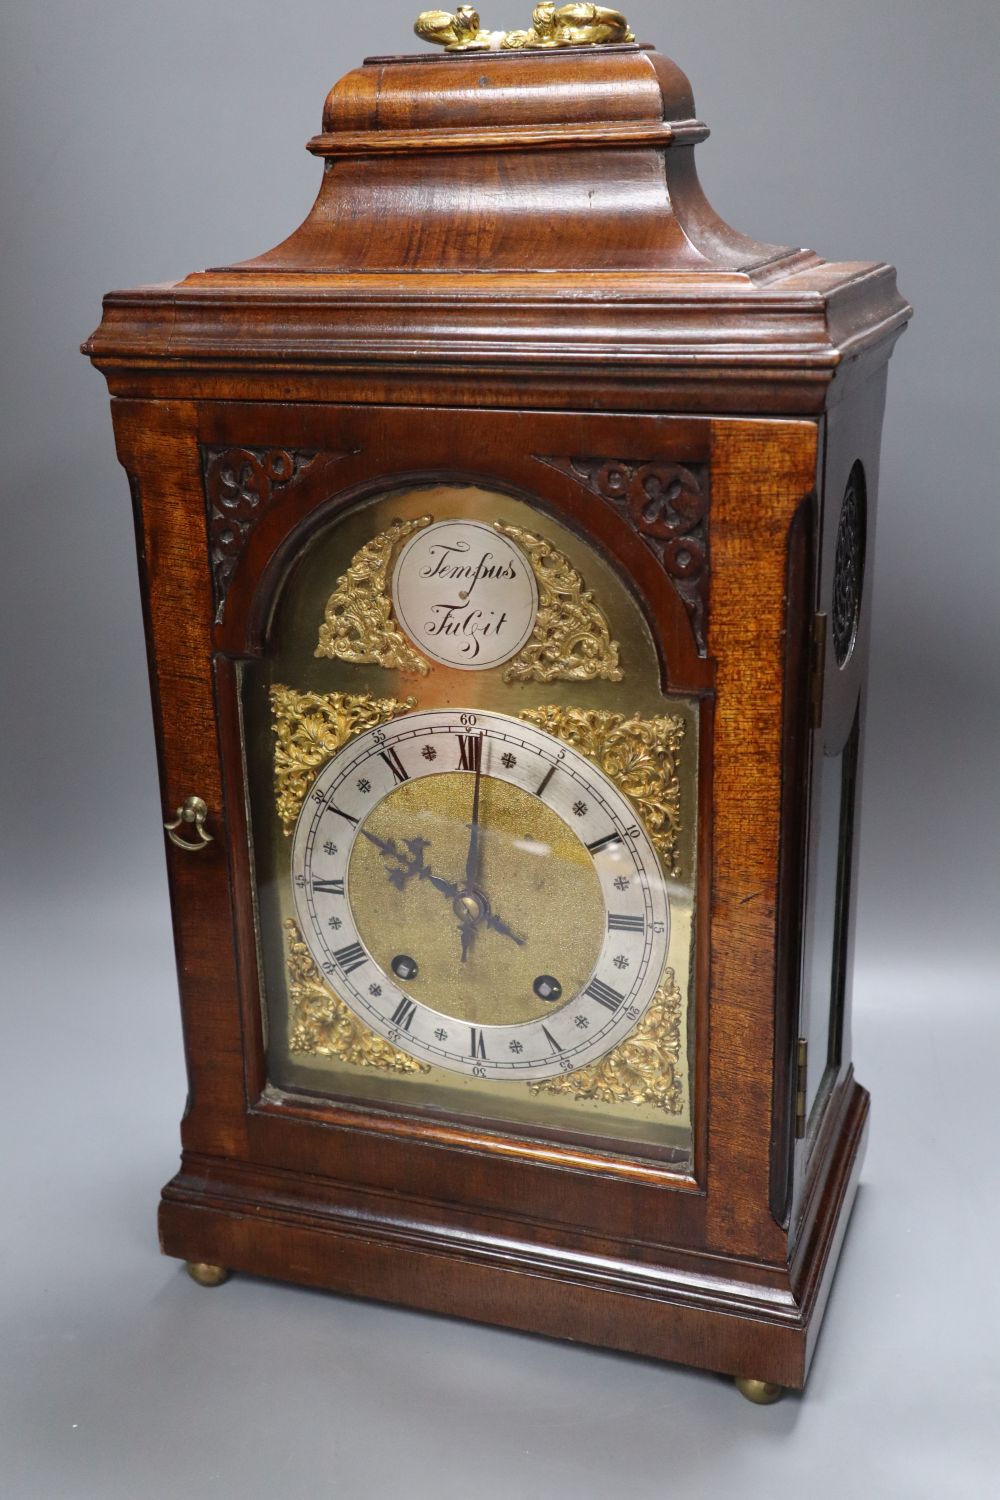 A George III-style mahogany mantel clock, 5.75 inch arched dial, gong striking movement, with key and pendulum, height 49cm